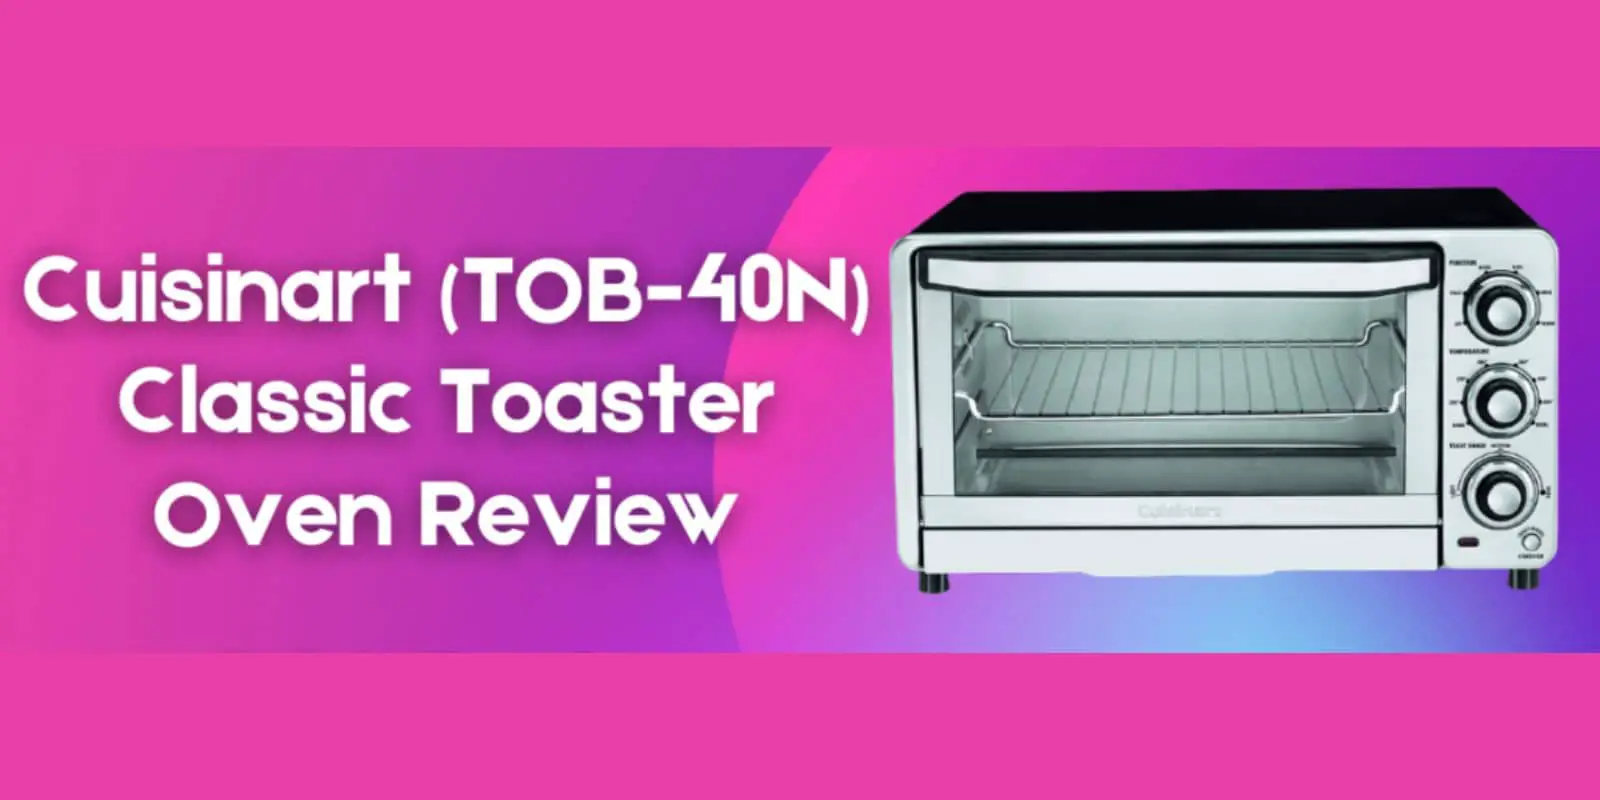 Cuisinart (TOB-40N) Classic Toaster Oven Review | Advantages, Features, Pros & Cons